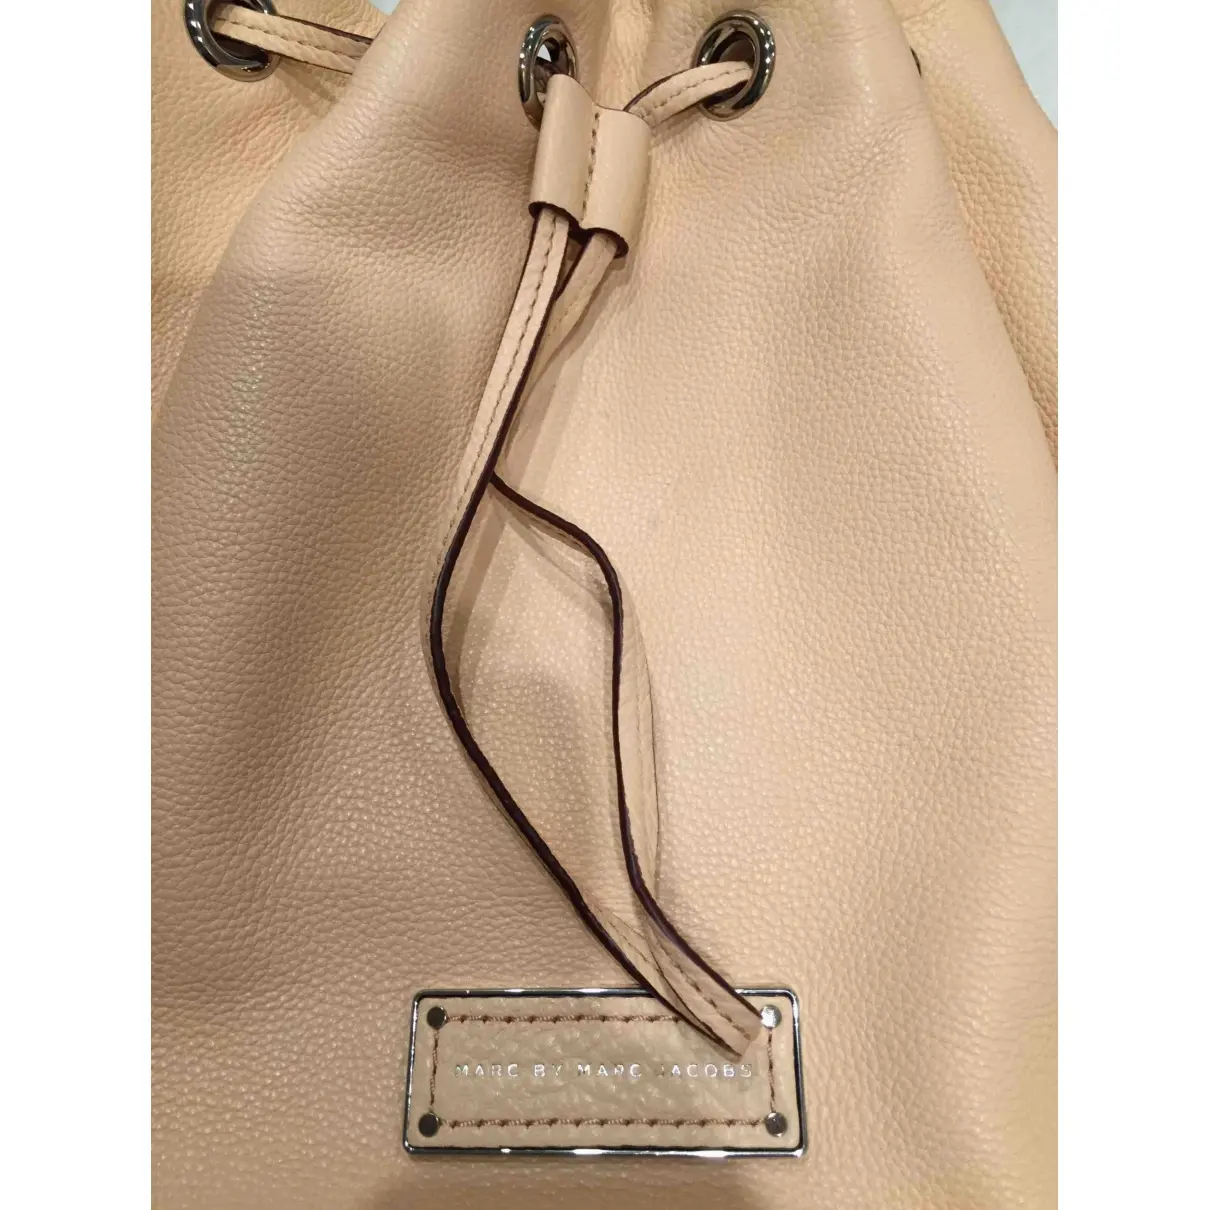 Buy Marc by Marc Jacobs Too Hot to Handle leather handbag online